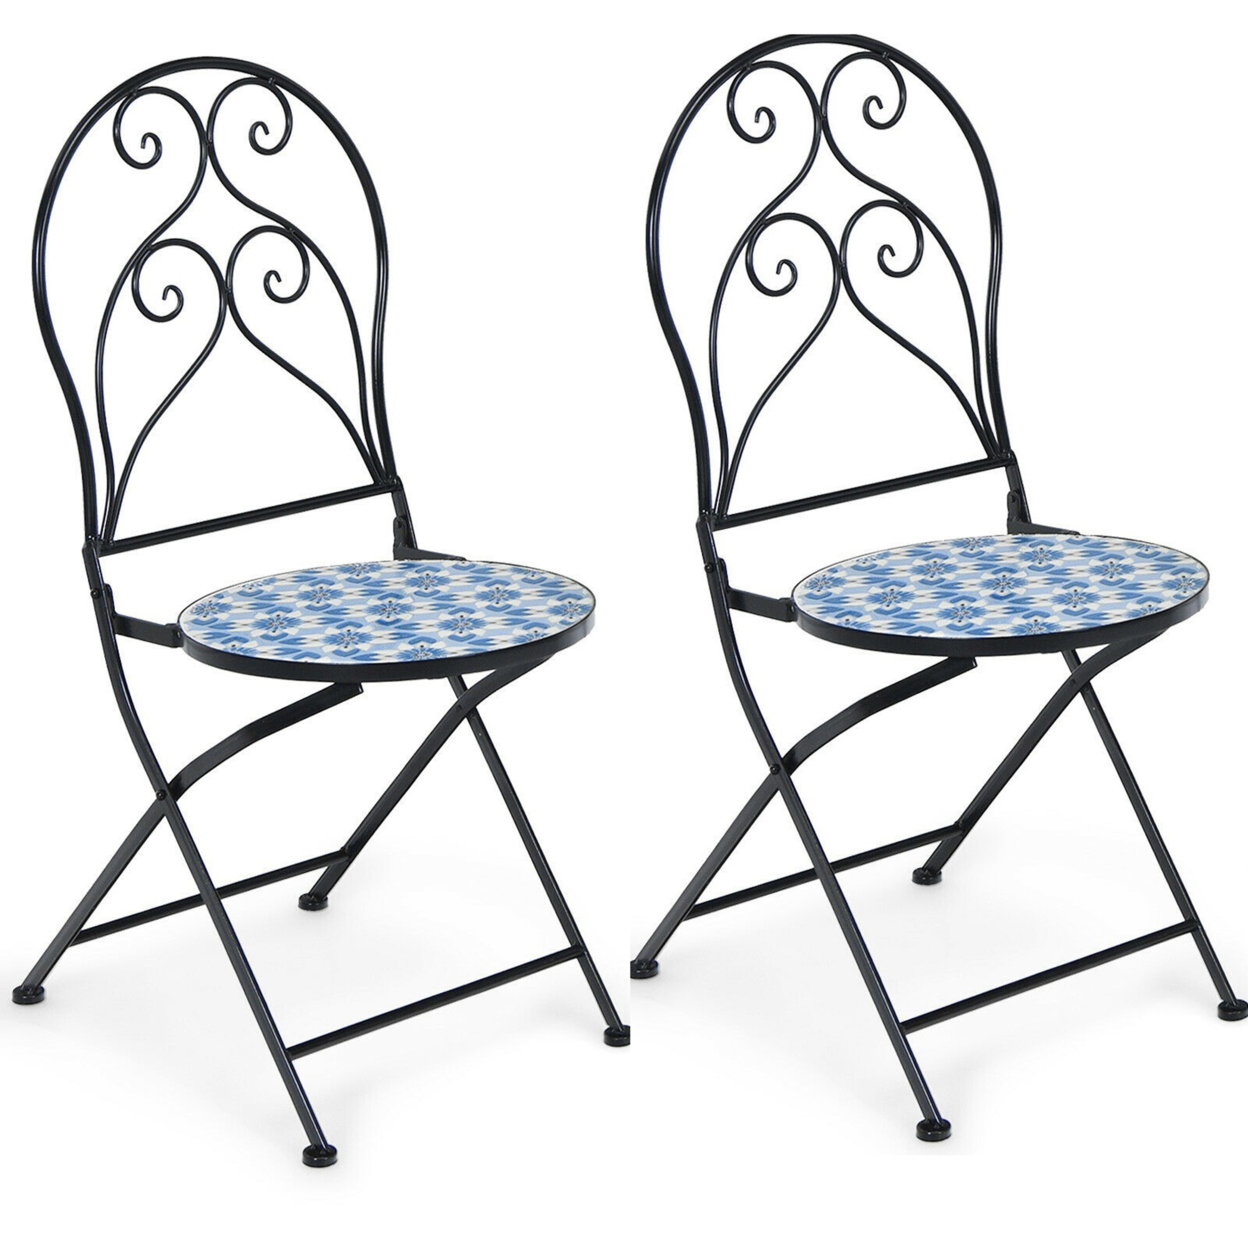 Set Of 2 Folding Patio Bistro Chairs Mosaic Chairs Outdoor Dining Chairs